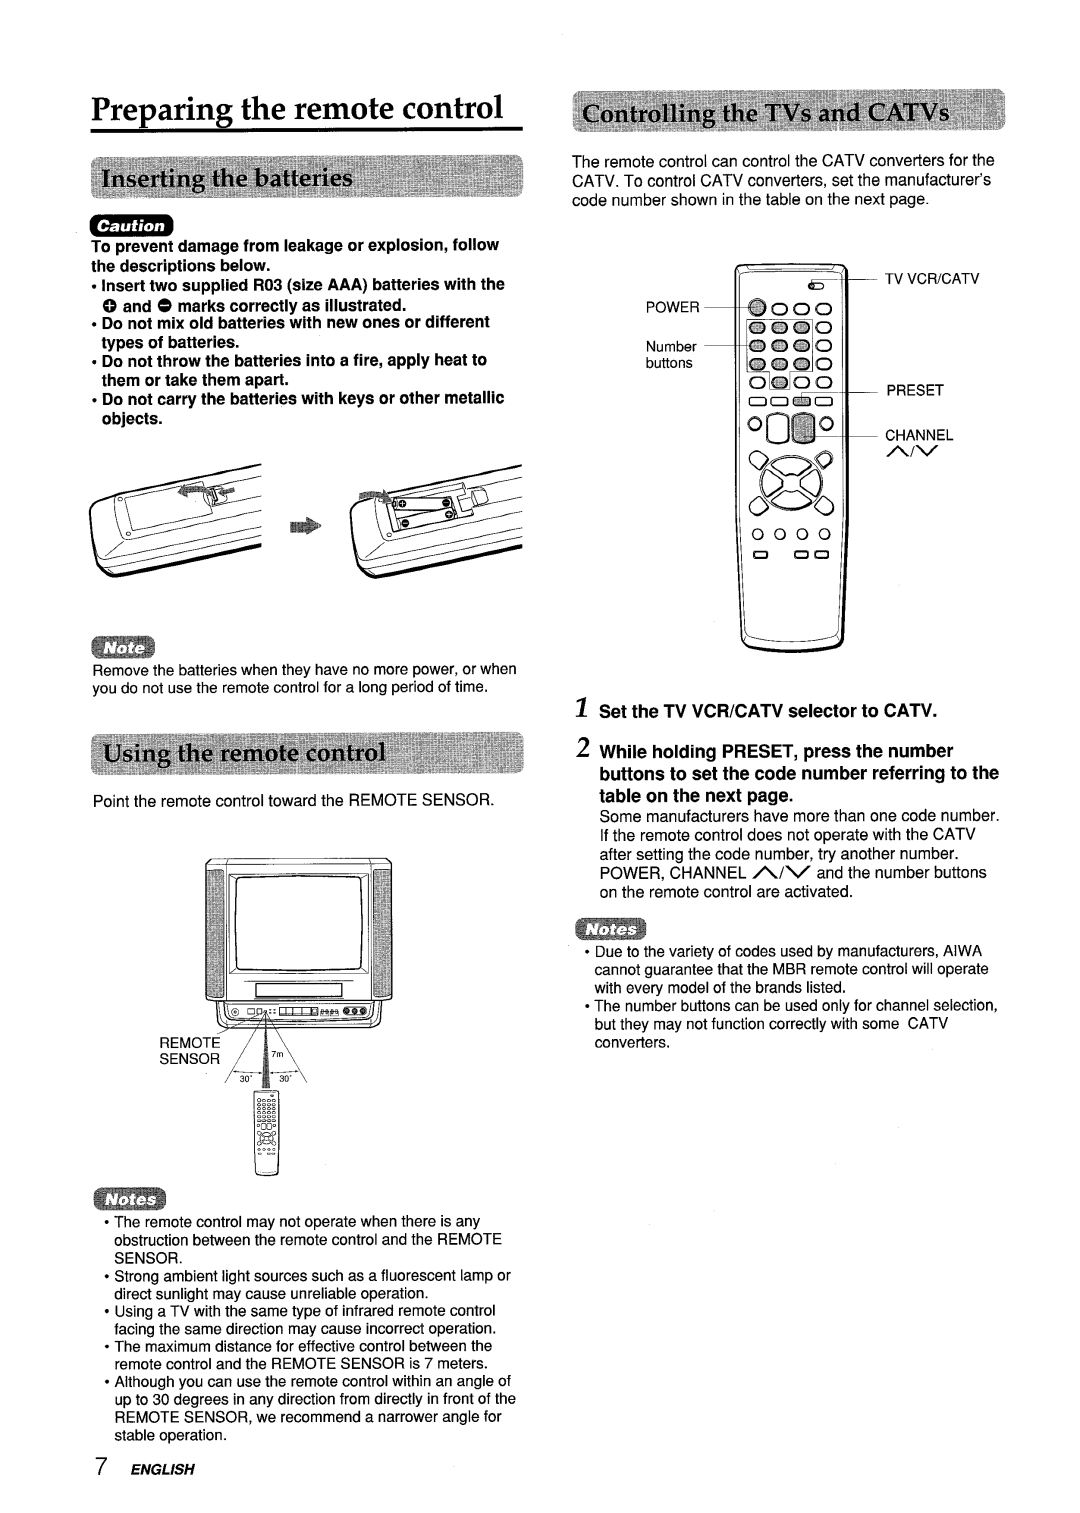 Aiwa VX-S135U, VX-S205U Preparing the remote control, buttonsto set the code numberreferringto the table on the next page 